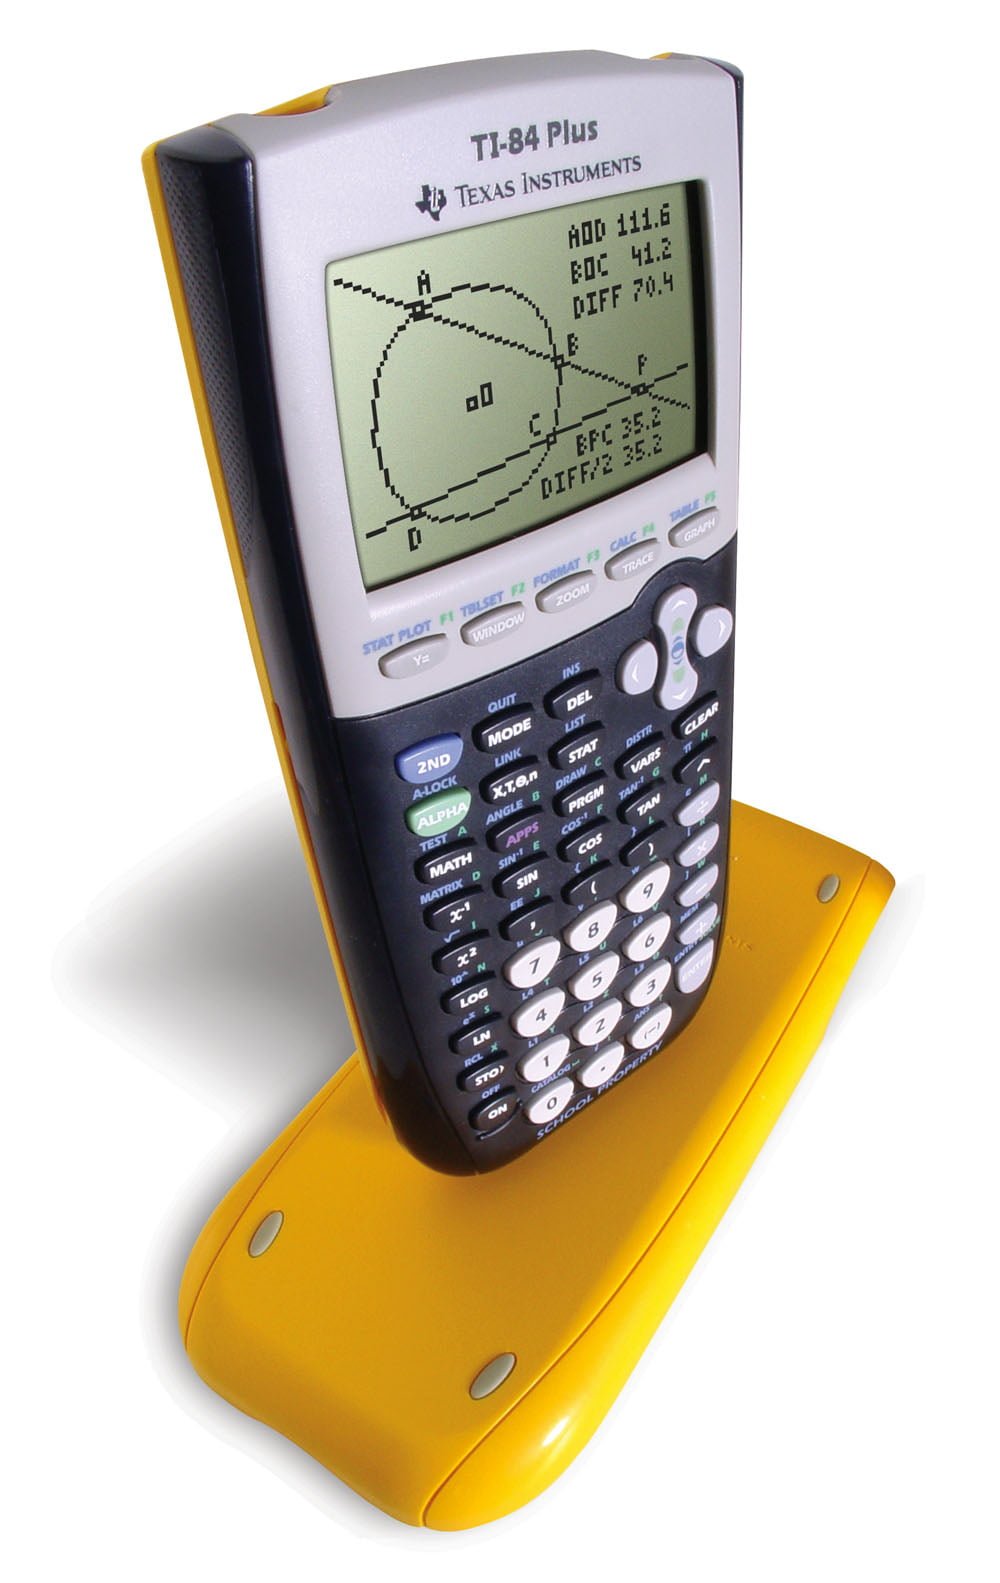 Texas TI 84 Plus Graphing Calculator EZ Spot Yellow with "School Property" printed on each unit